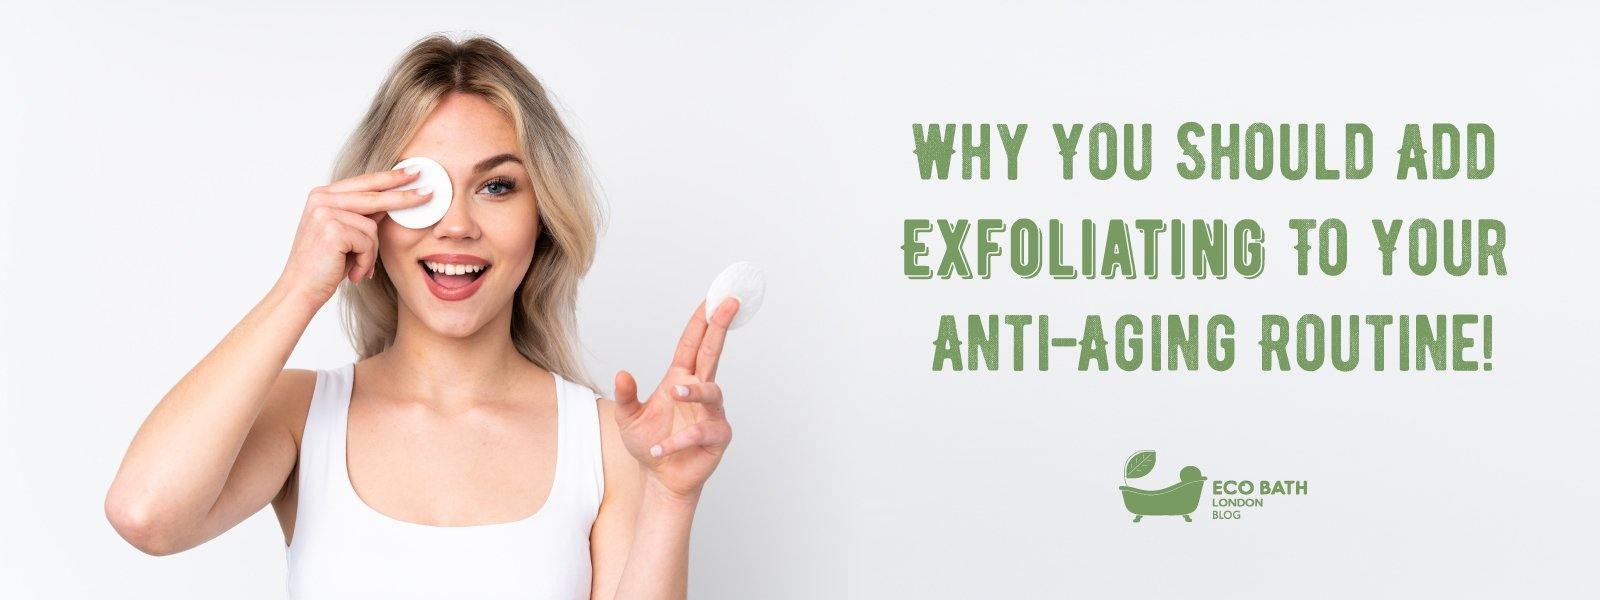 Why You Should Add Exfoliating To Your Anti-Aging Routine